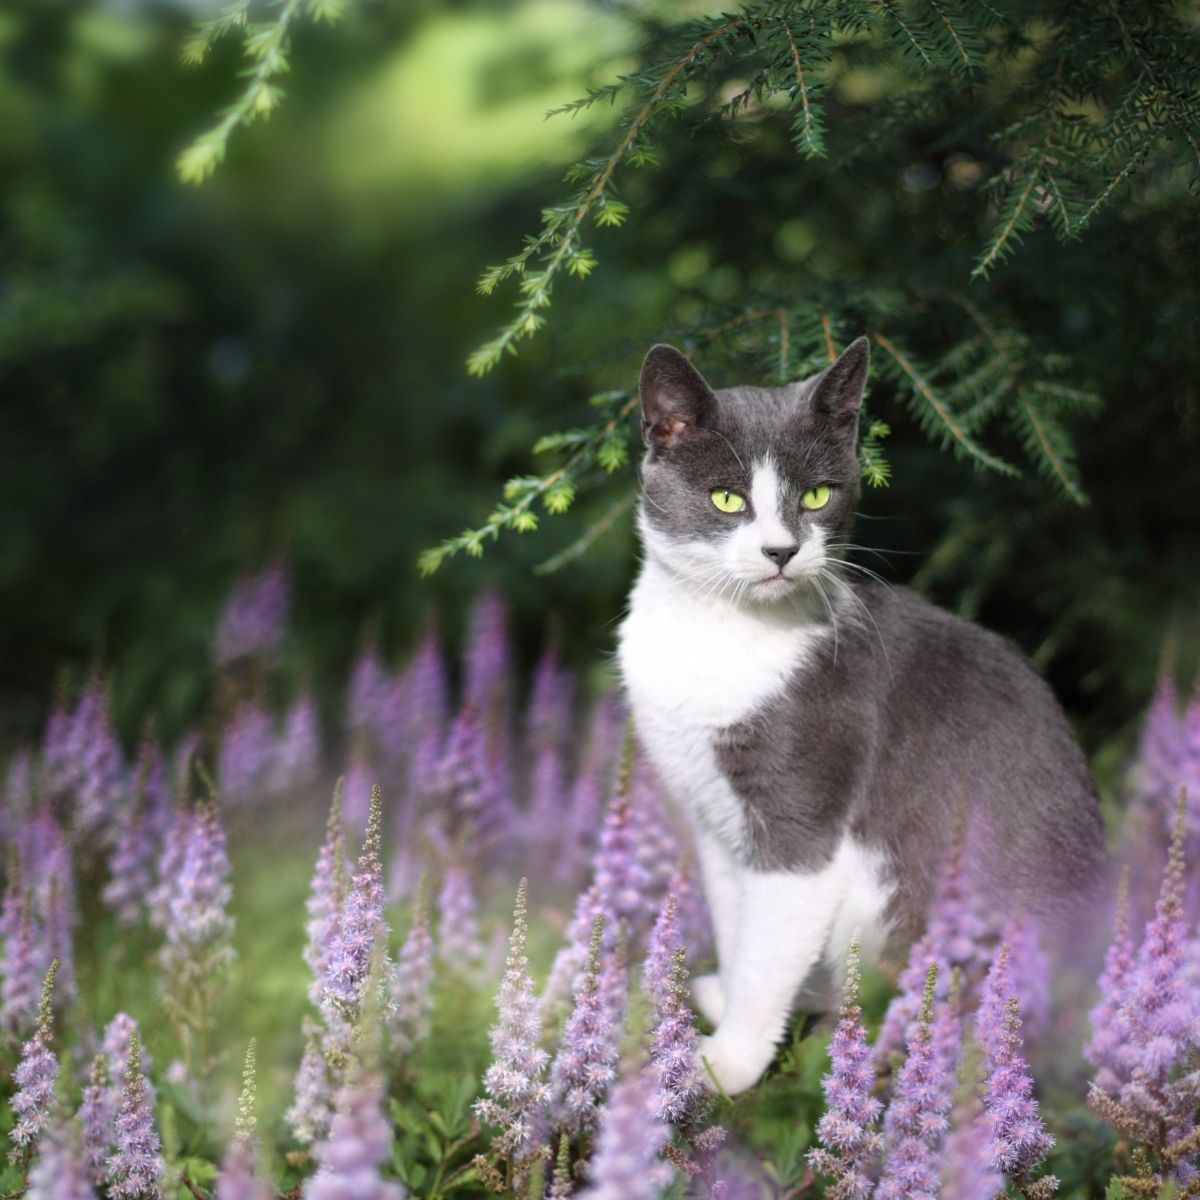 cat in the garden wiht lavender colored flowers